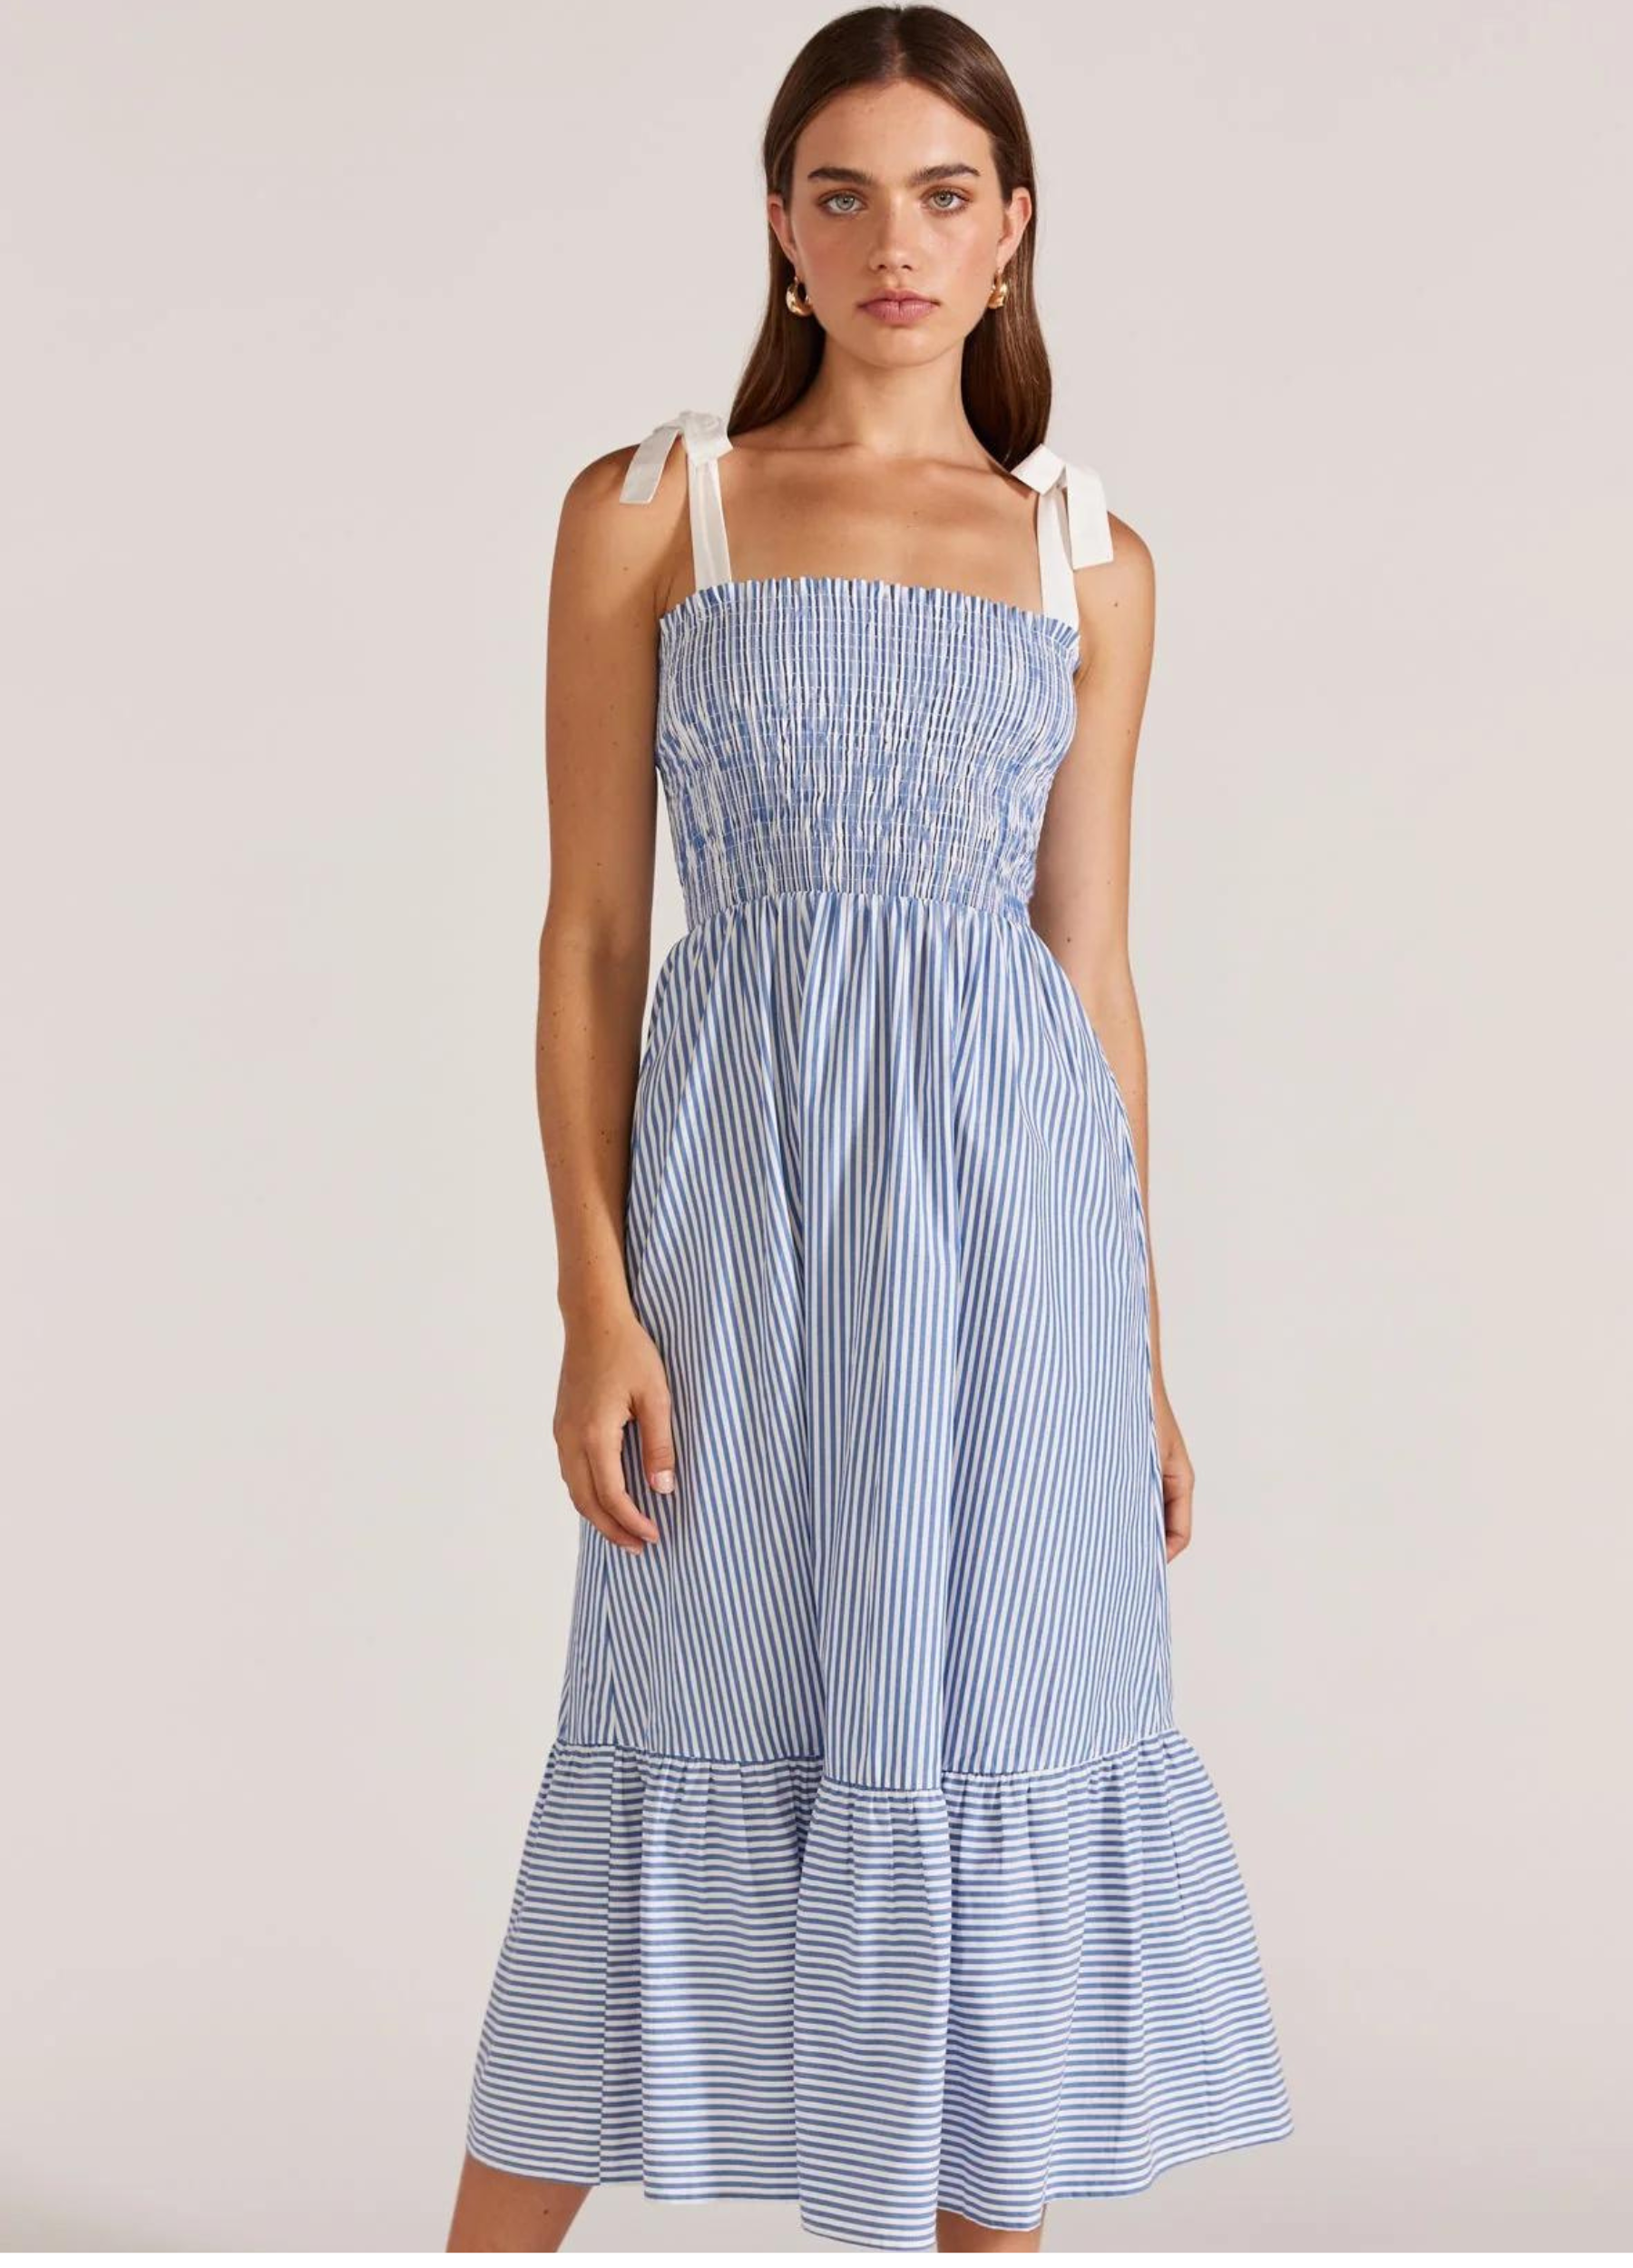 Blue and white shirred bust dress with white contrast straps from Staple the Label